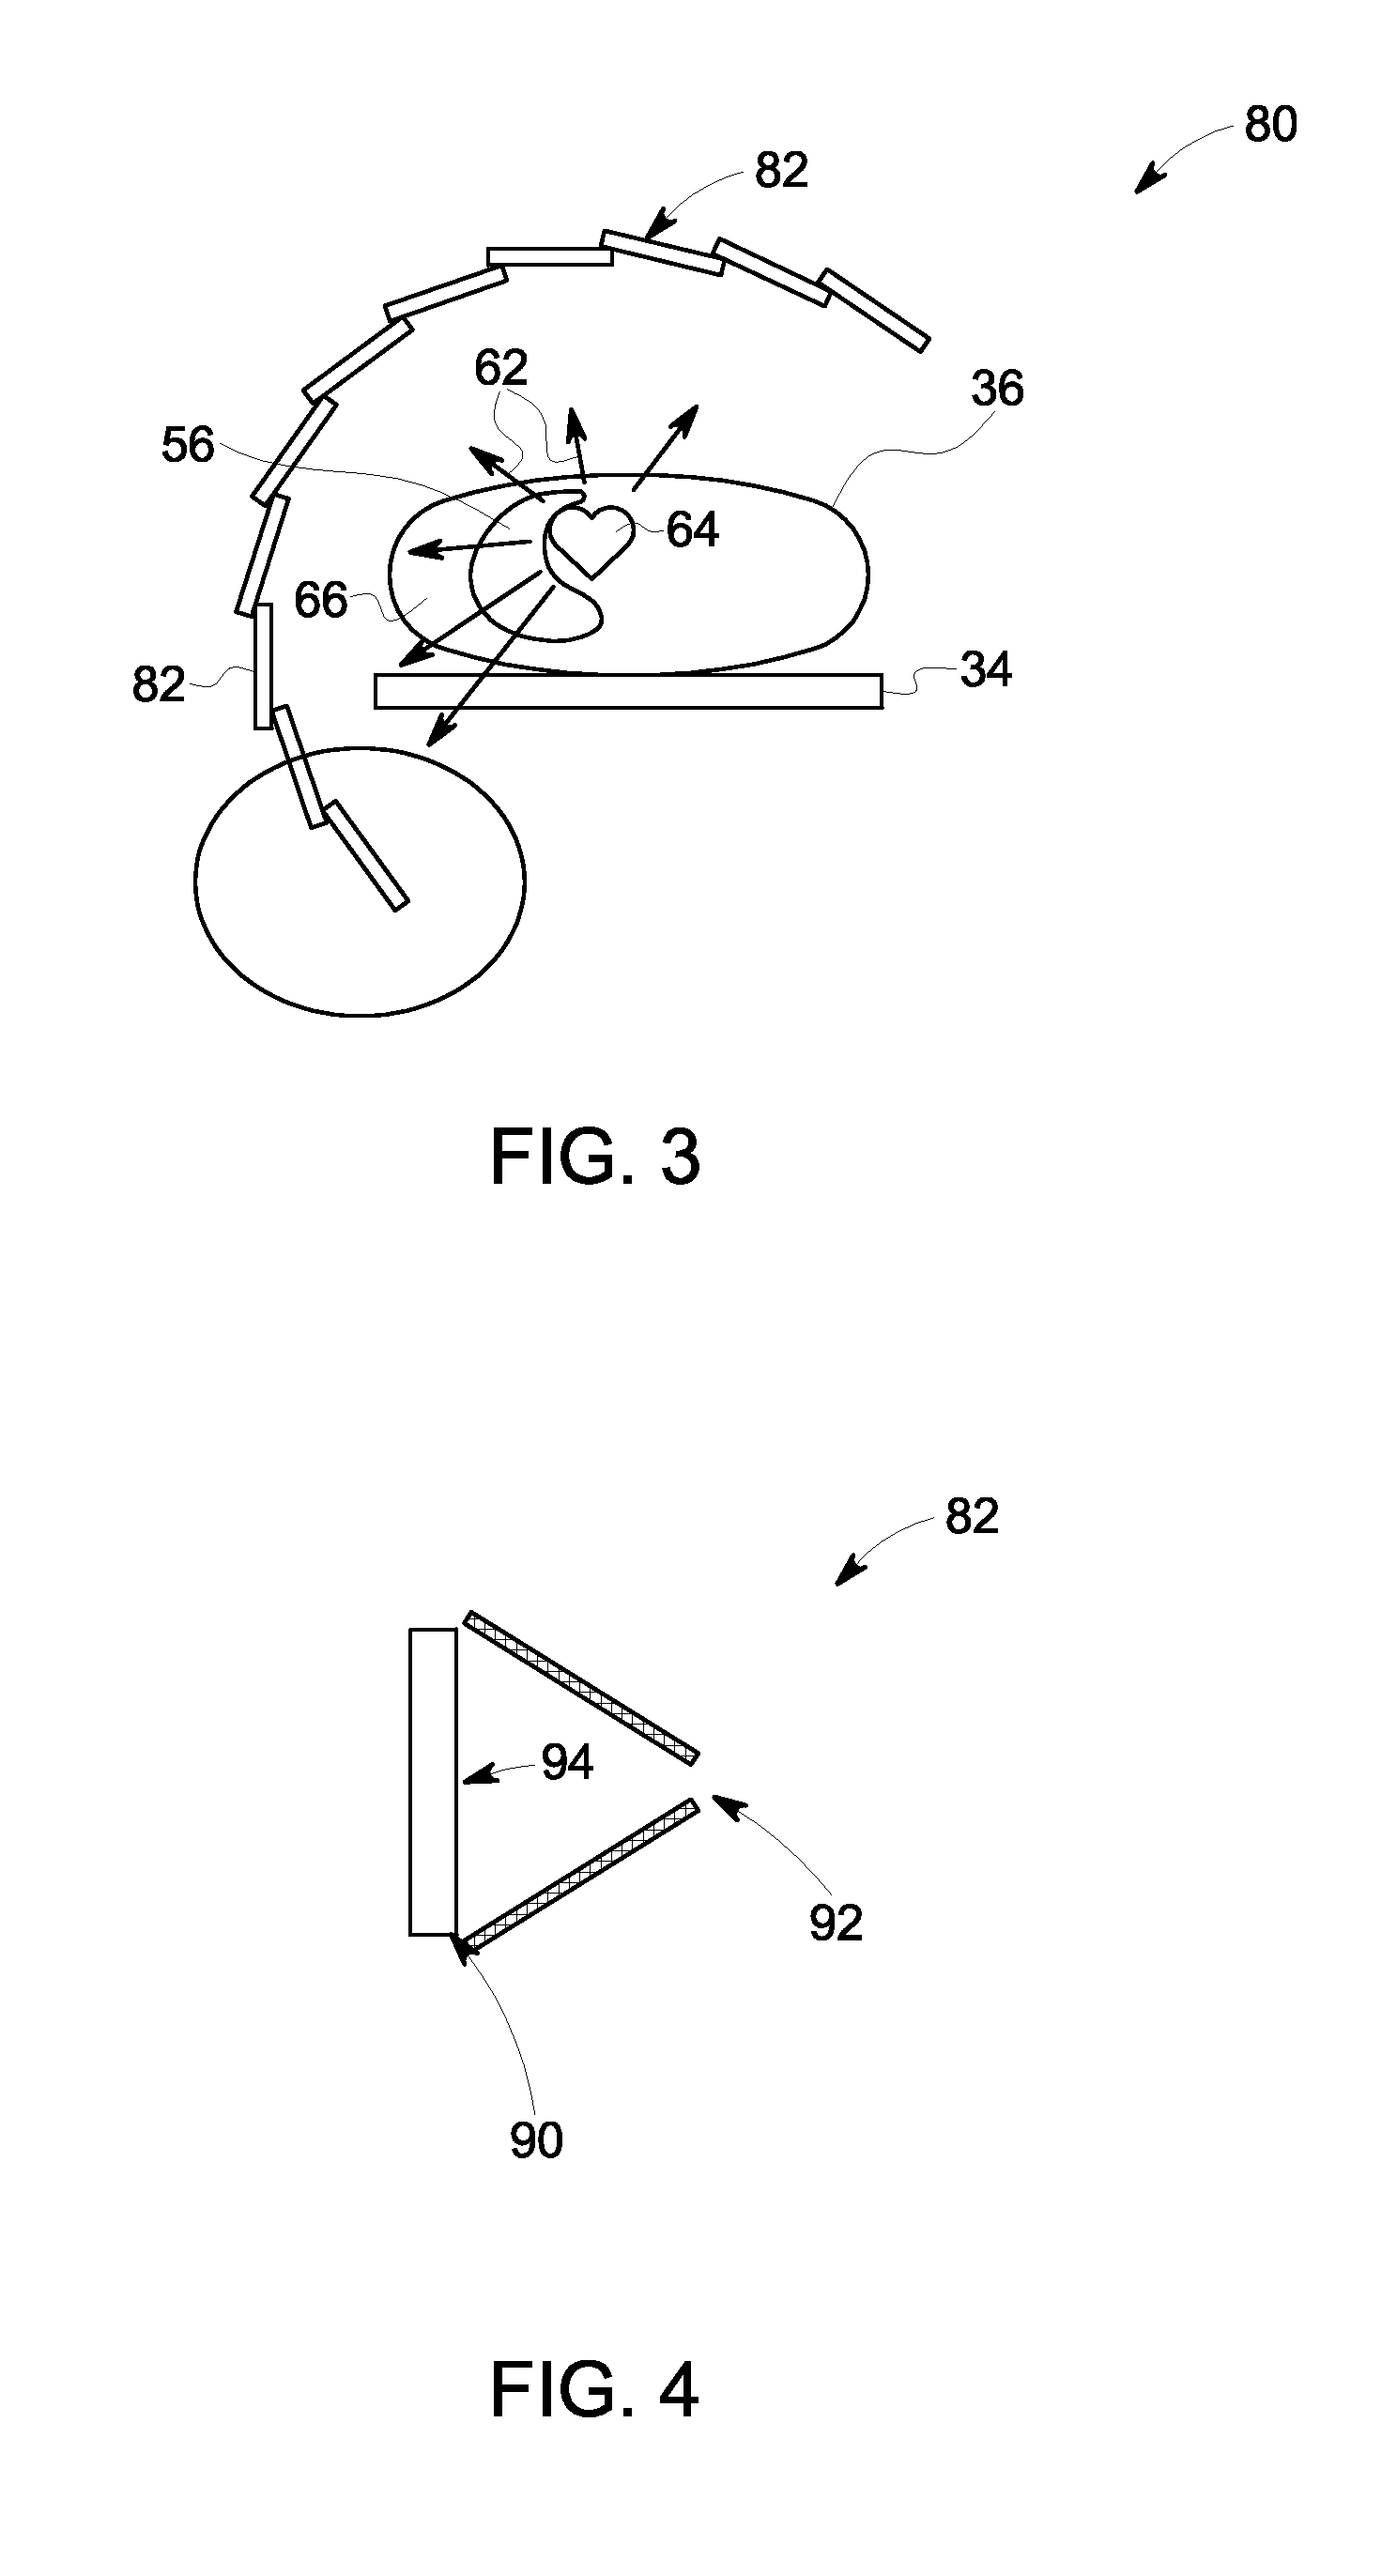 Systems and methods for attenuation compensation in nuclear medicine imaging based on emission data